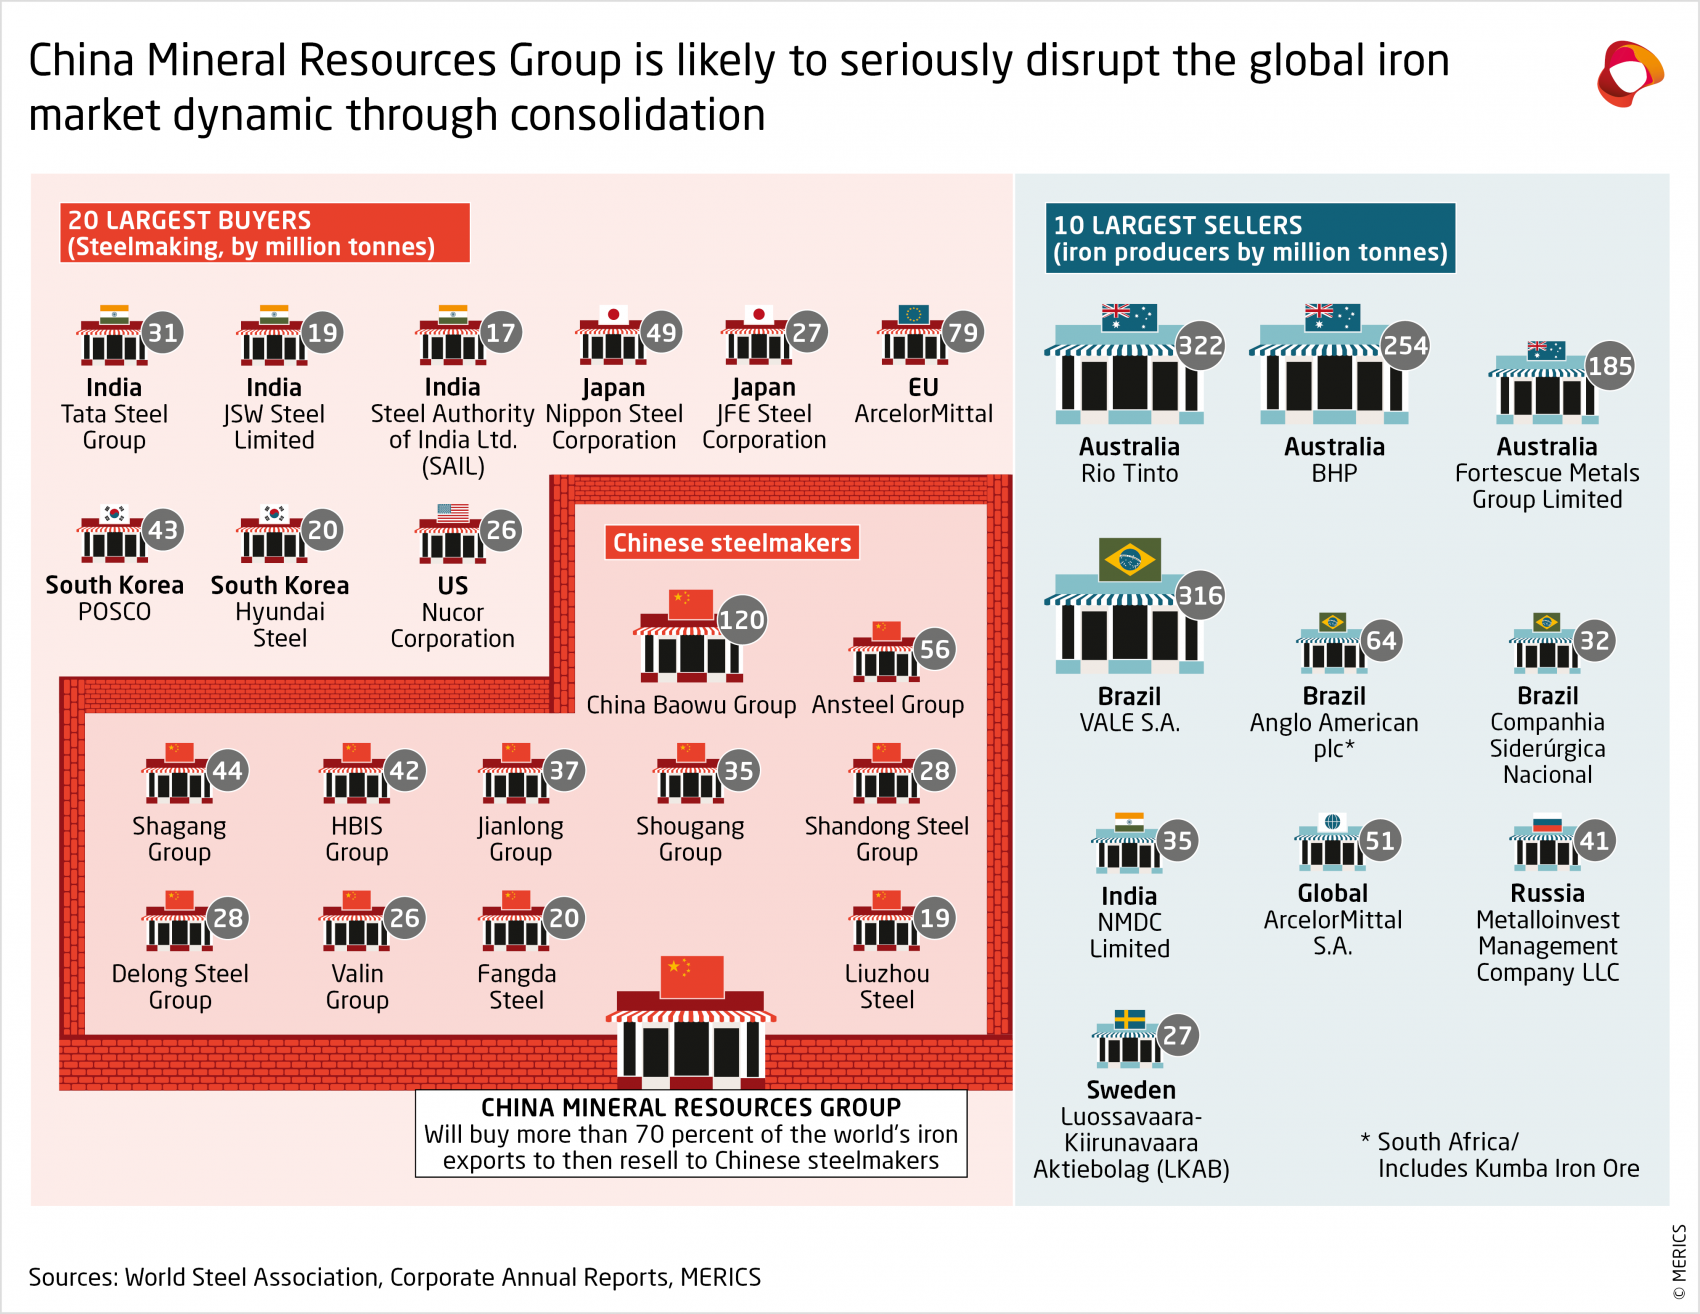 MERICS-China-Global-Competition-China-Mineral-Resources-Group-is-likely-to-disrupt-the-global-iron-market